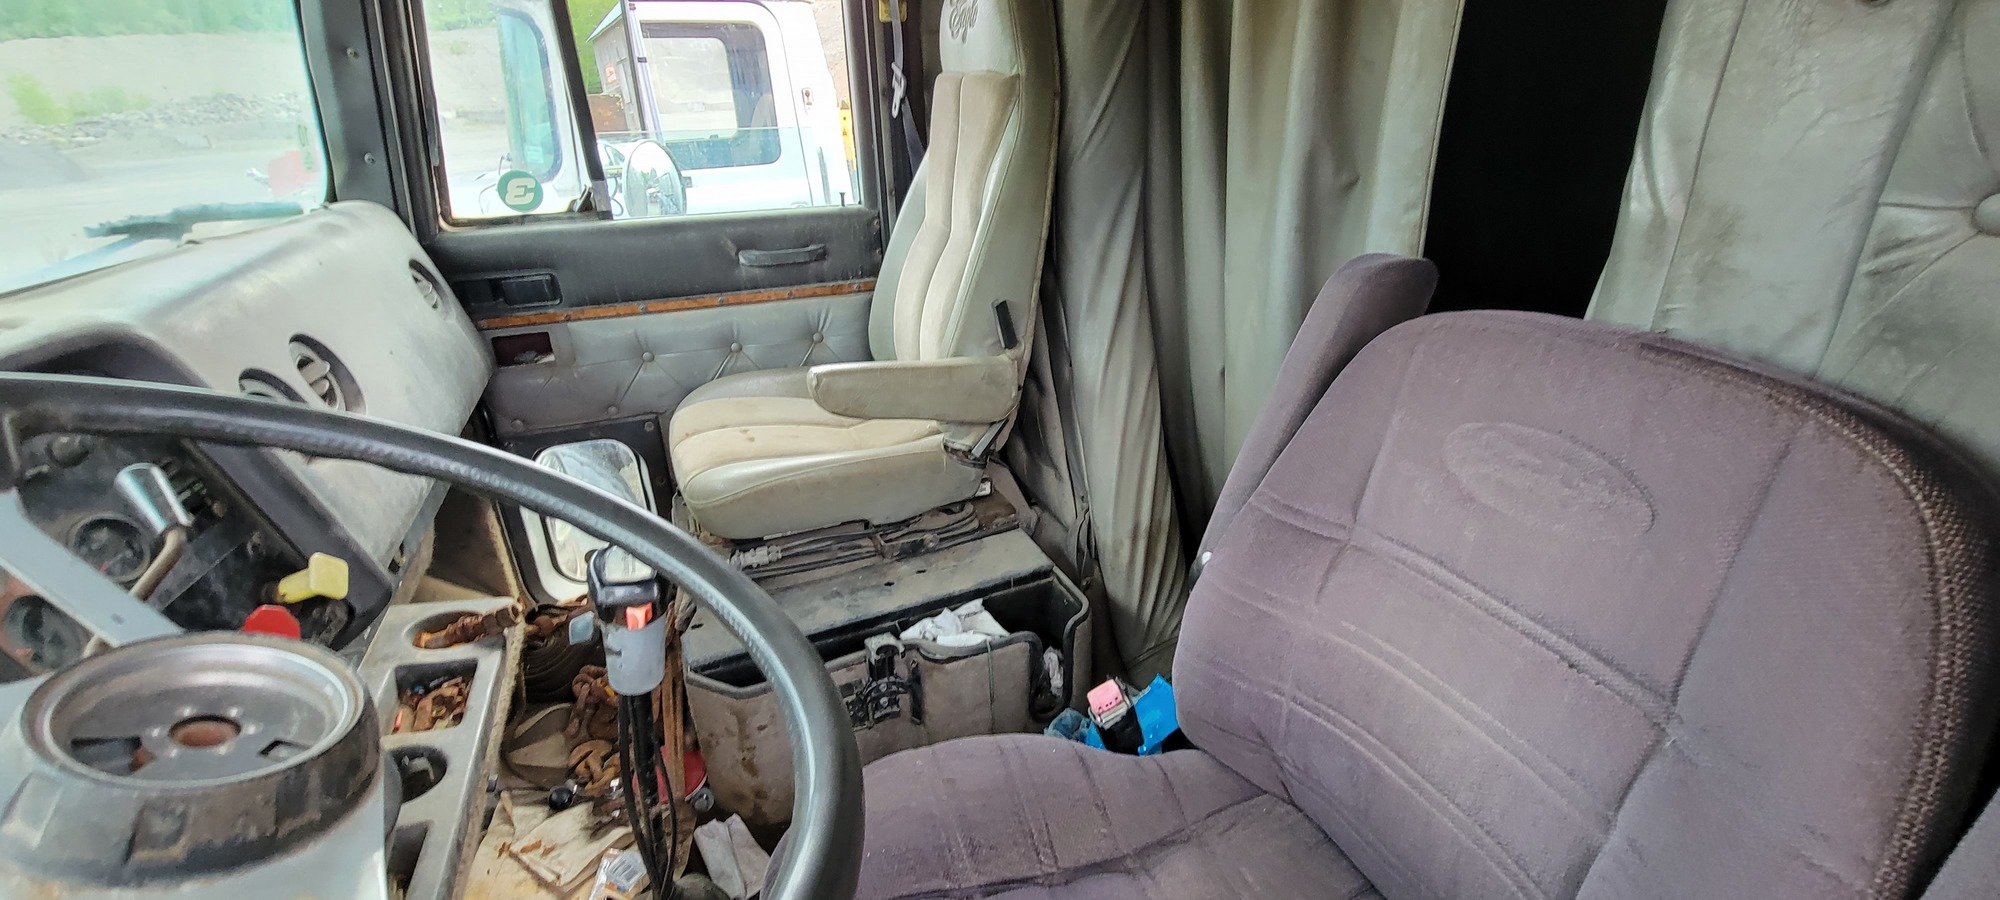 1994 INTERNATIONAL 9300 HEAVY DUTY TRUCK WITH CONVENTIONAL SLEEPER | Iron Listing